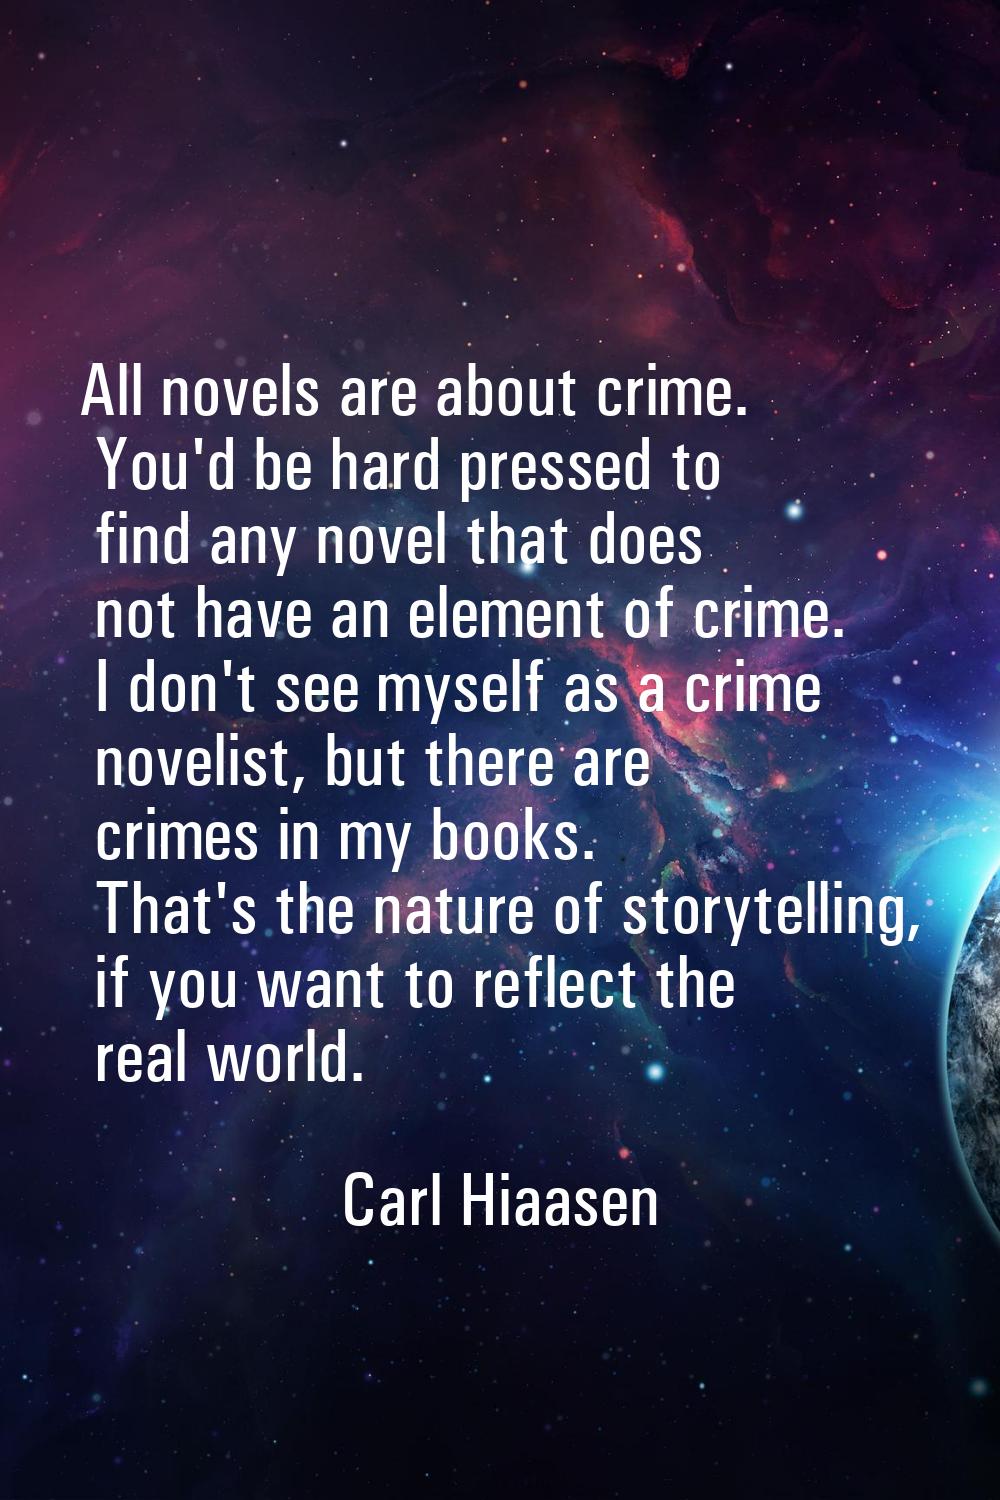 All novels are about crime. You'd be hard pressed to find any novel that does not have an element o